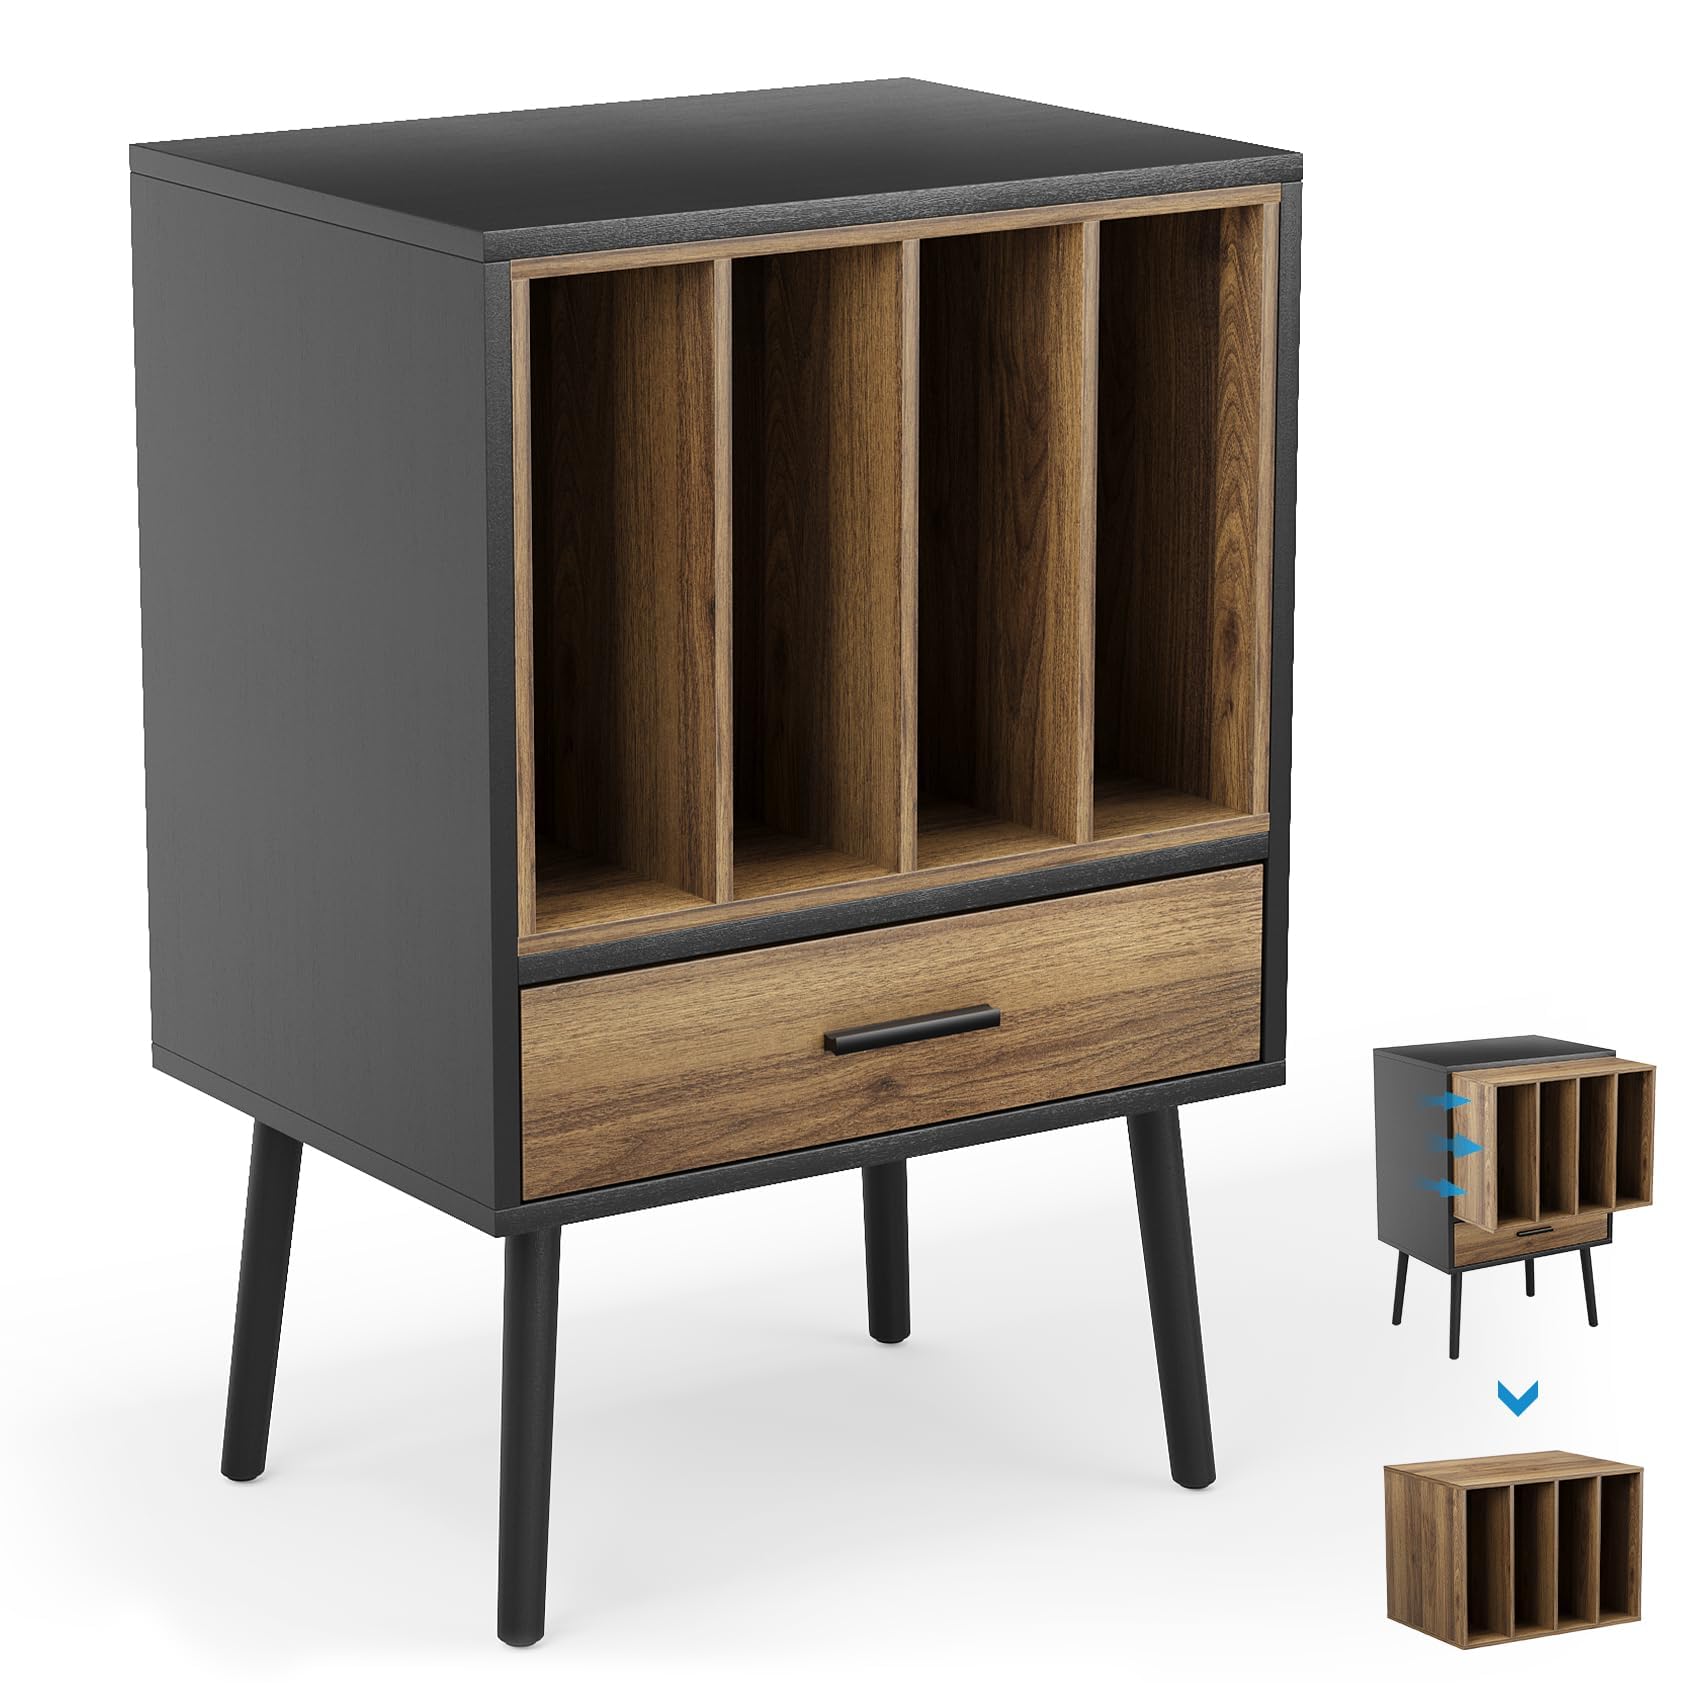 Semiocthome Record Player Stand with Nesting Vinyl Storage Crate, Record Player Table with a Drawer and Solid Wood Legs, Side End Table for Turntables for Living Room Bedroom